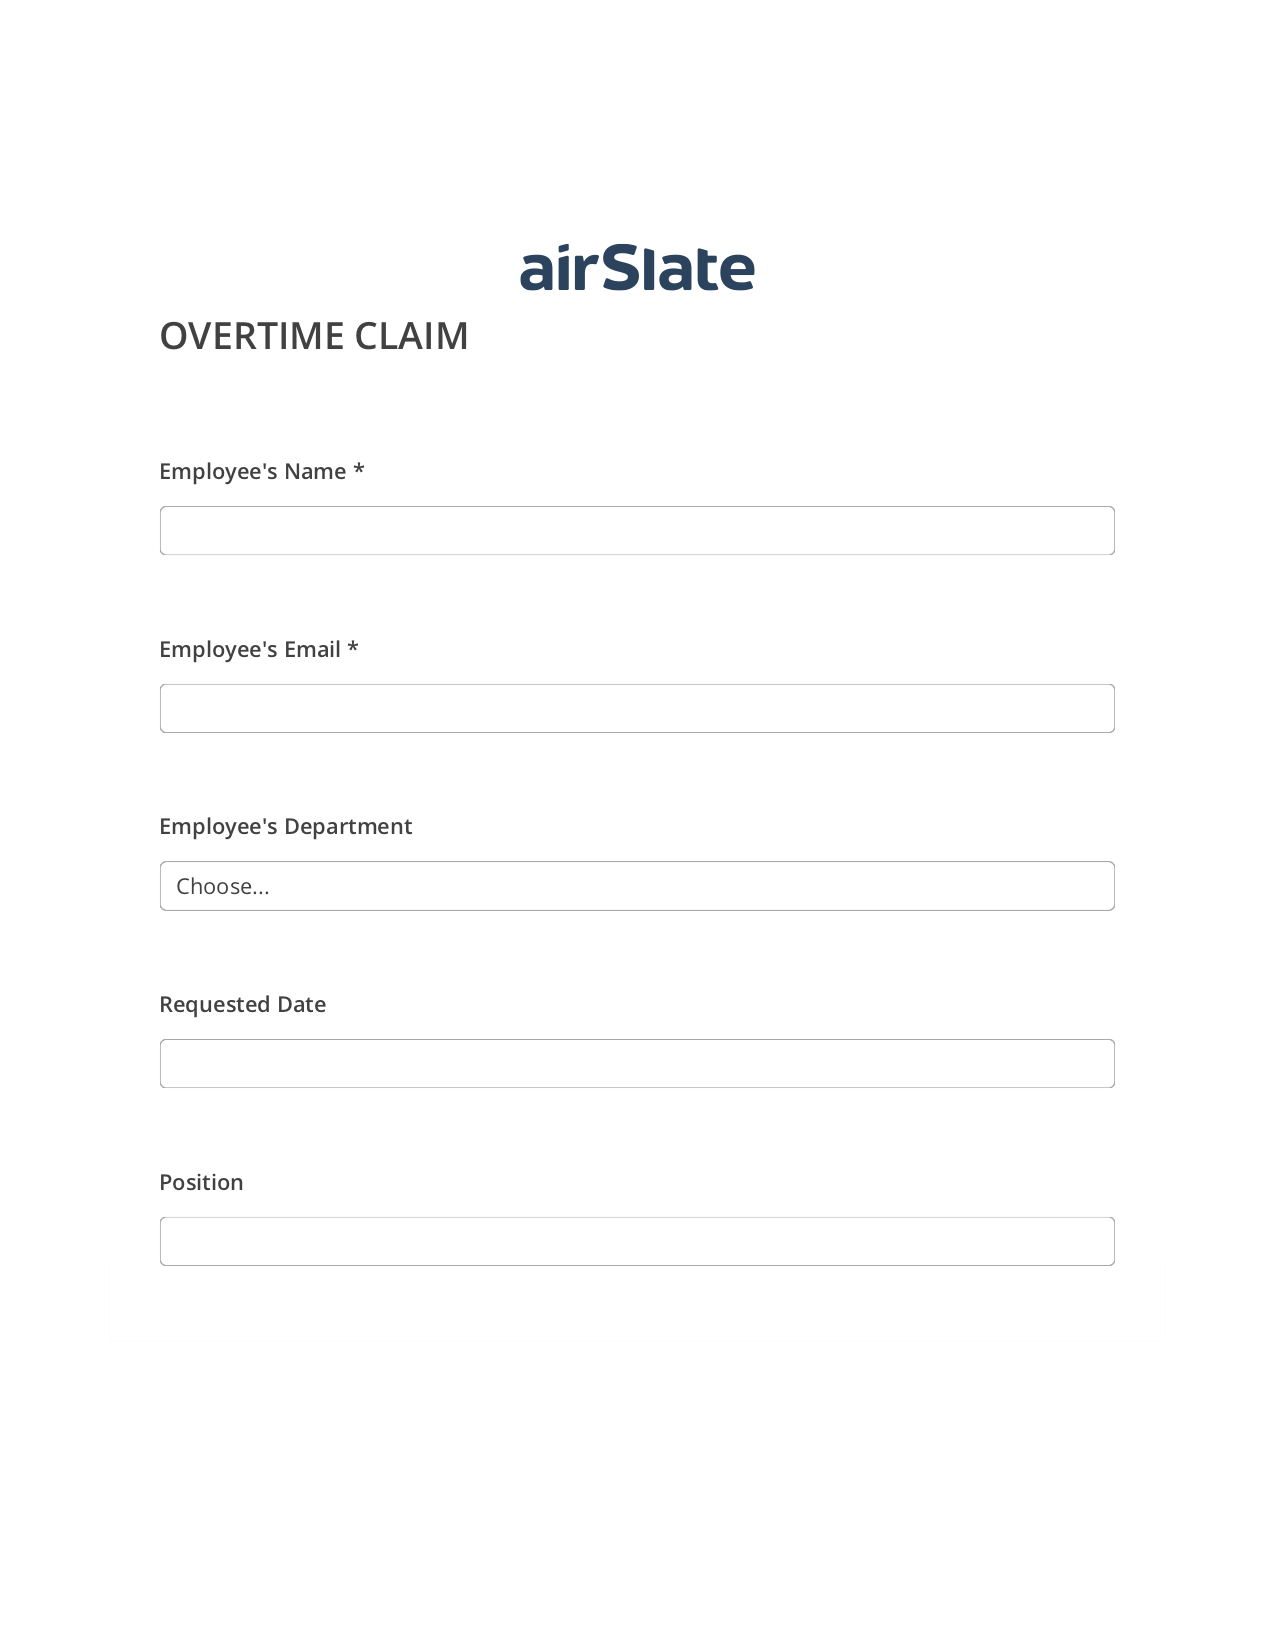 Overtime Claim Flow Pre-fill from another Slate Bot